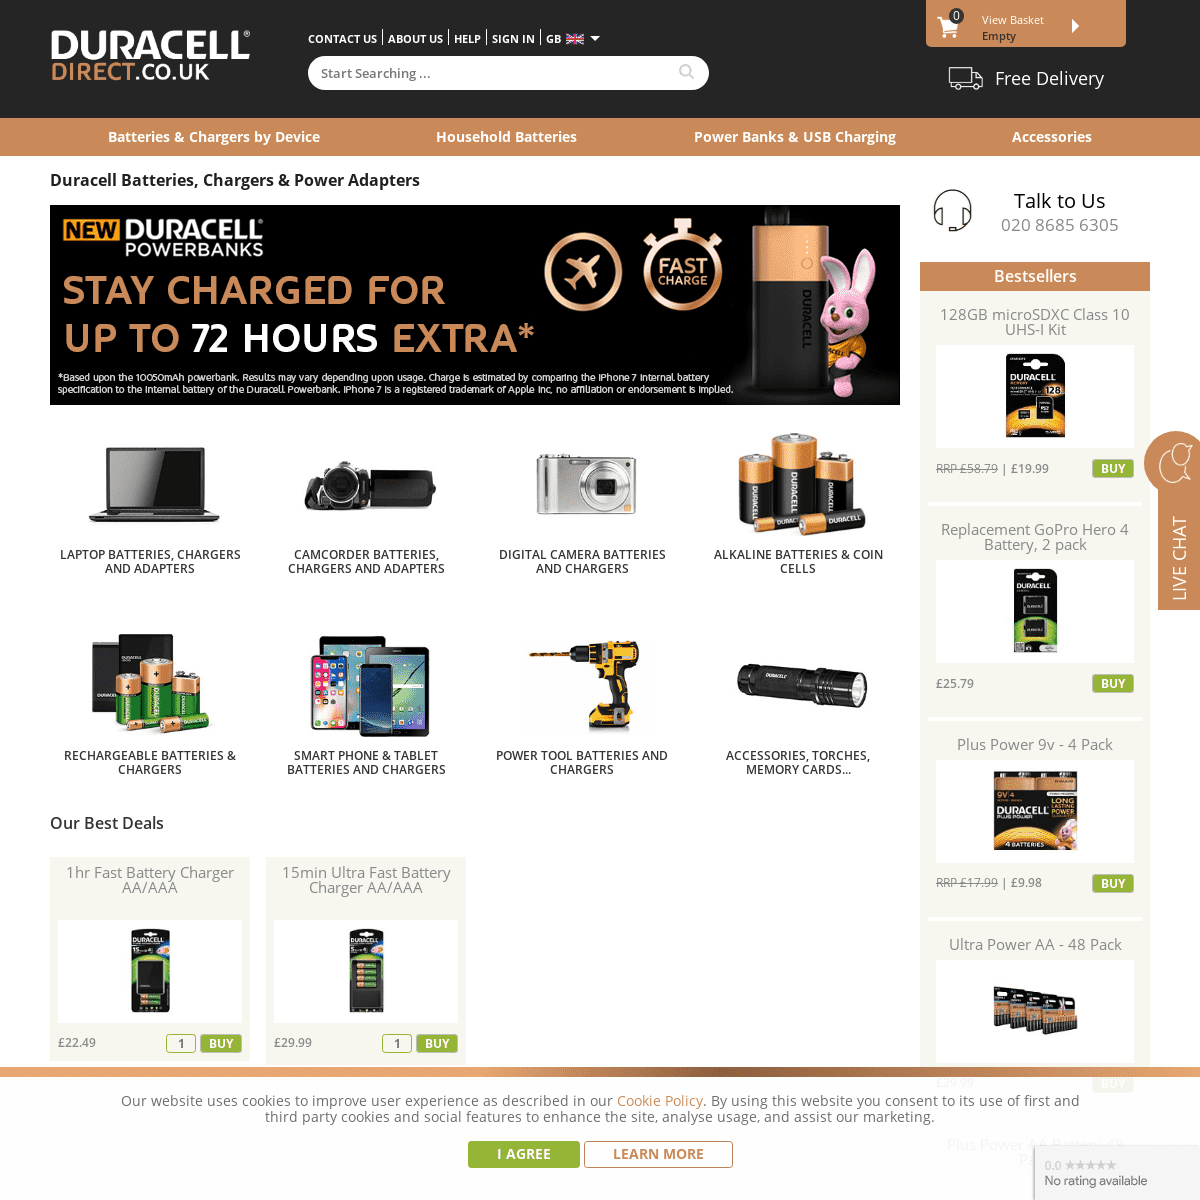 A complete backup of duracelldirect.co.uk